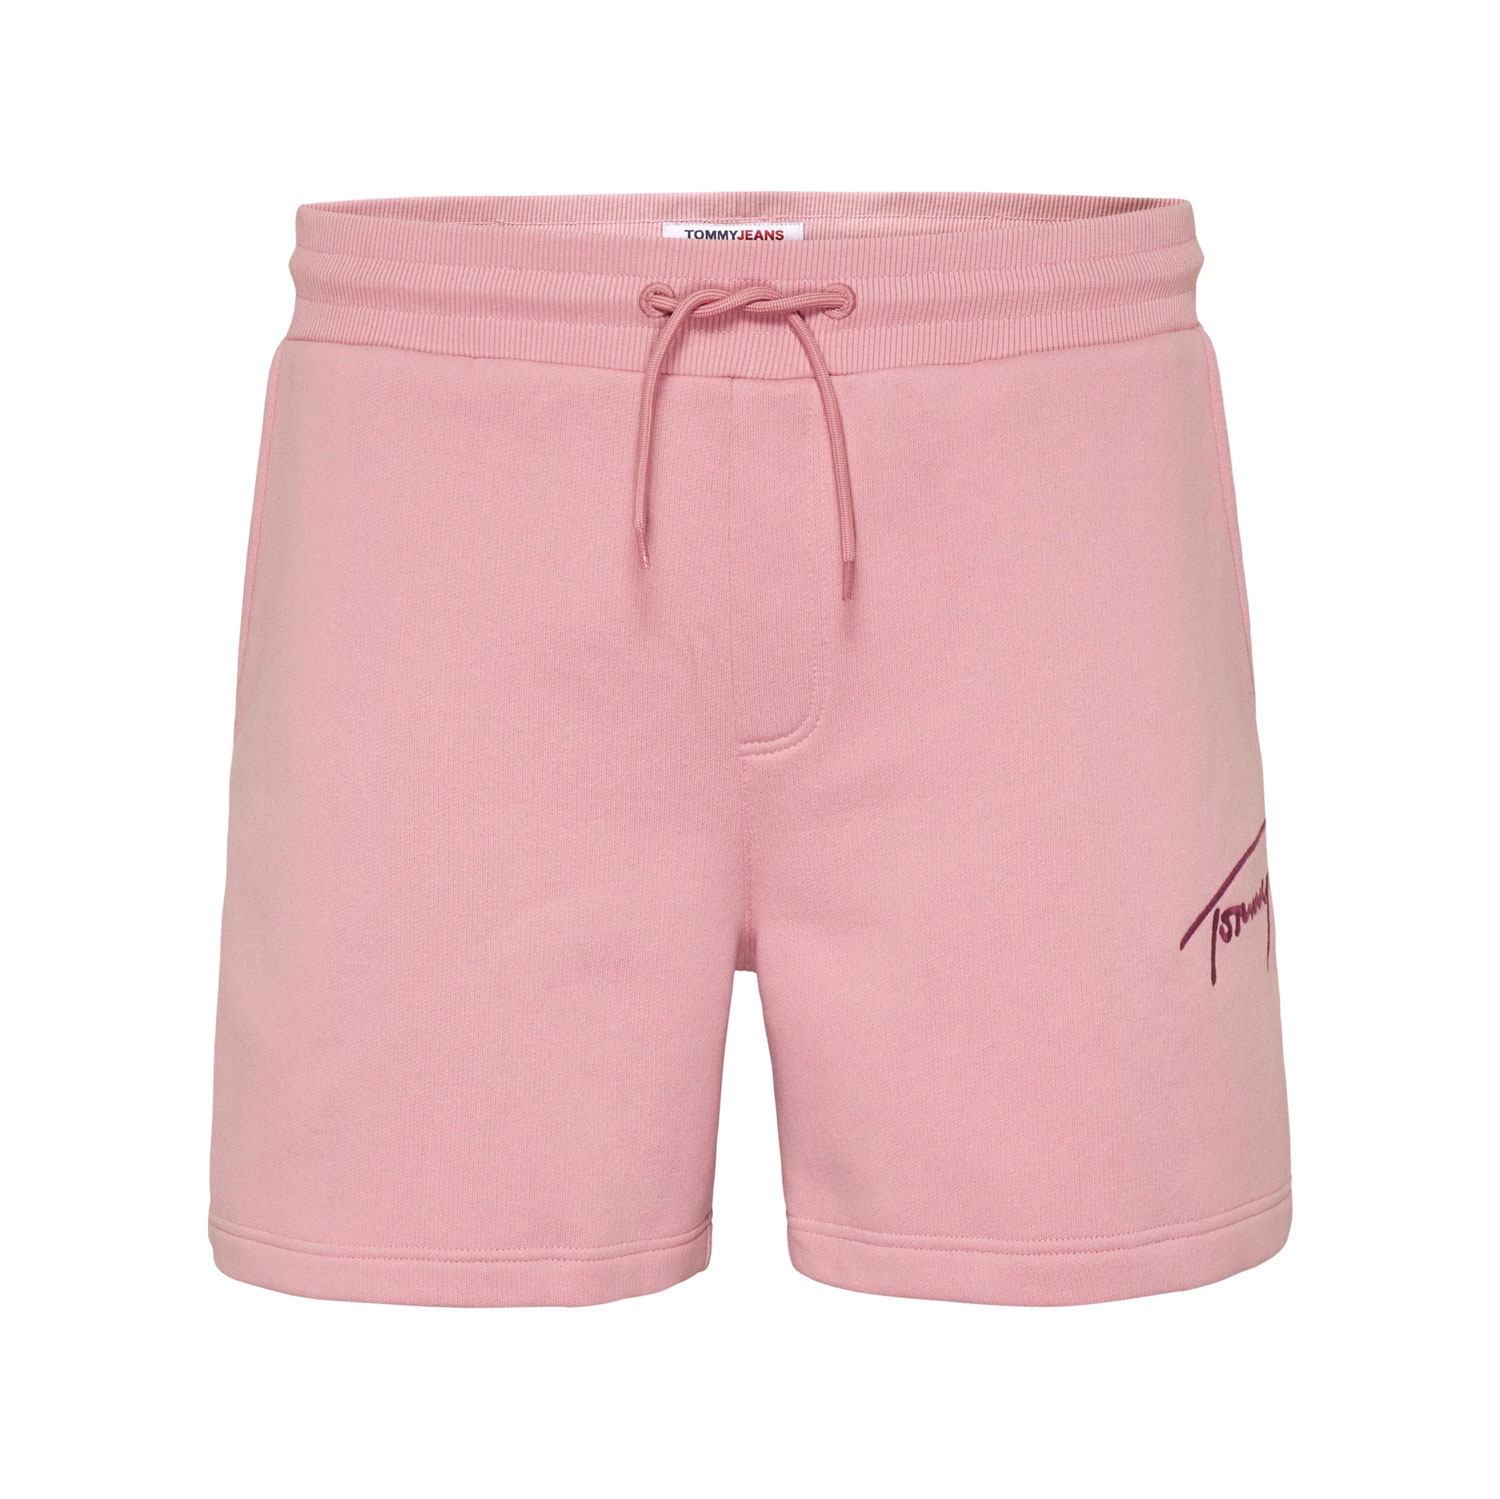 Tommy Jeans Signature Short - Broadway Pink